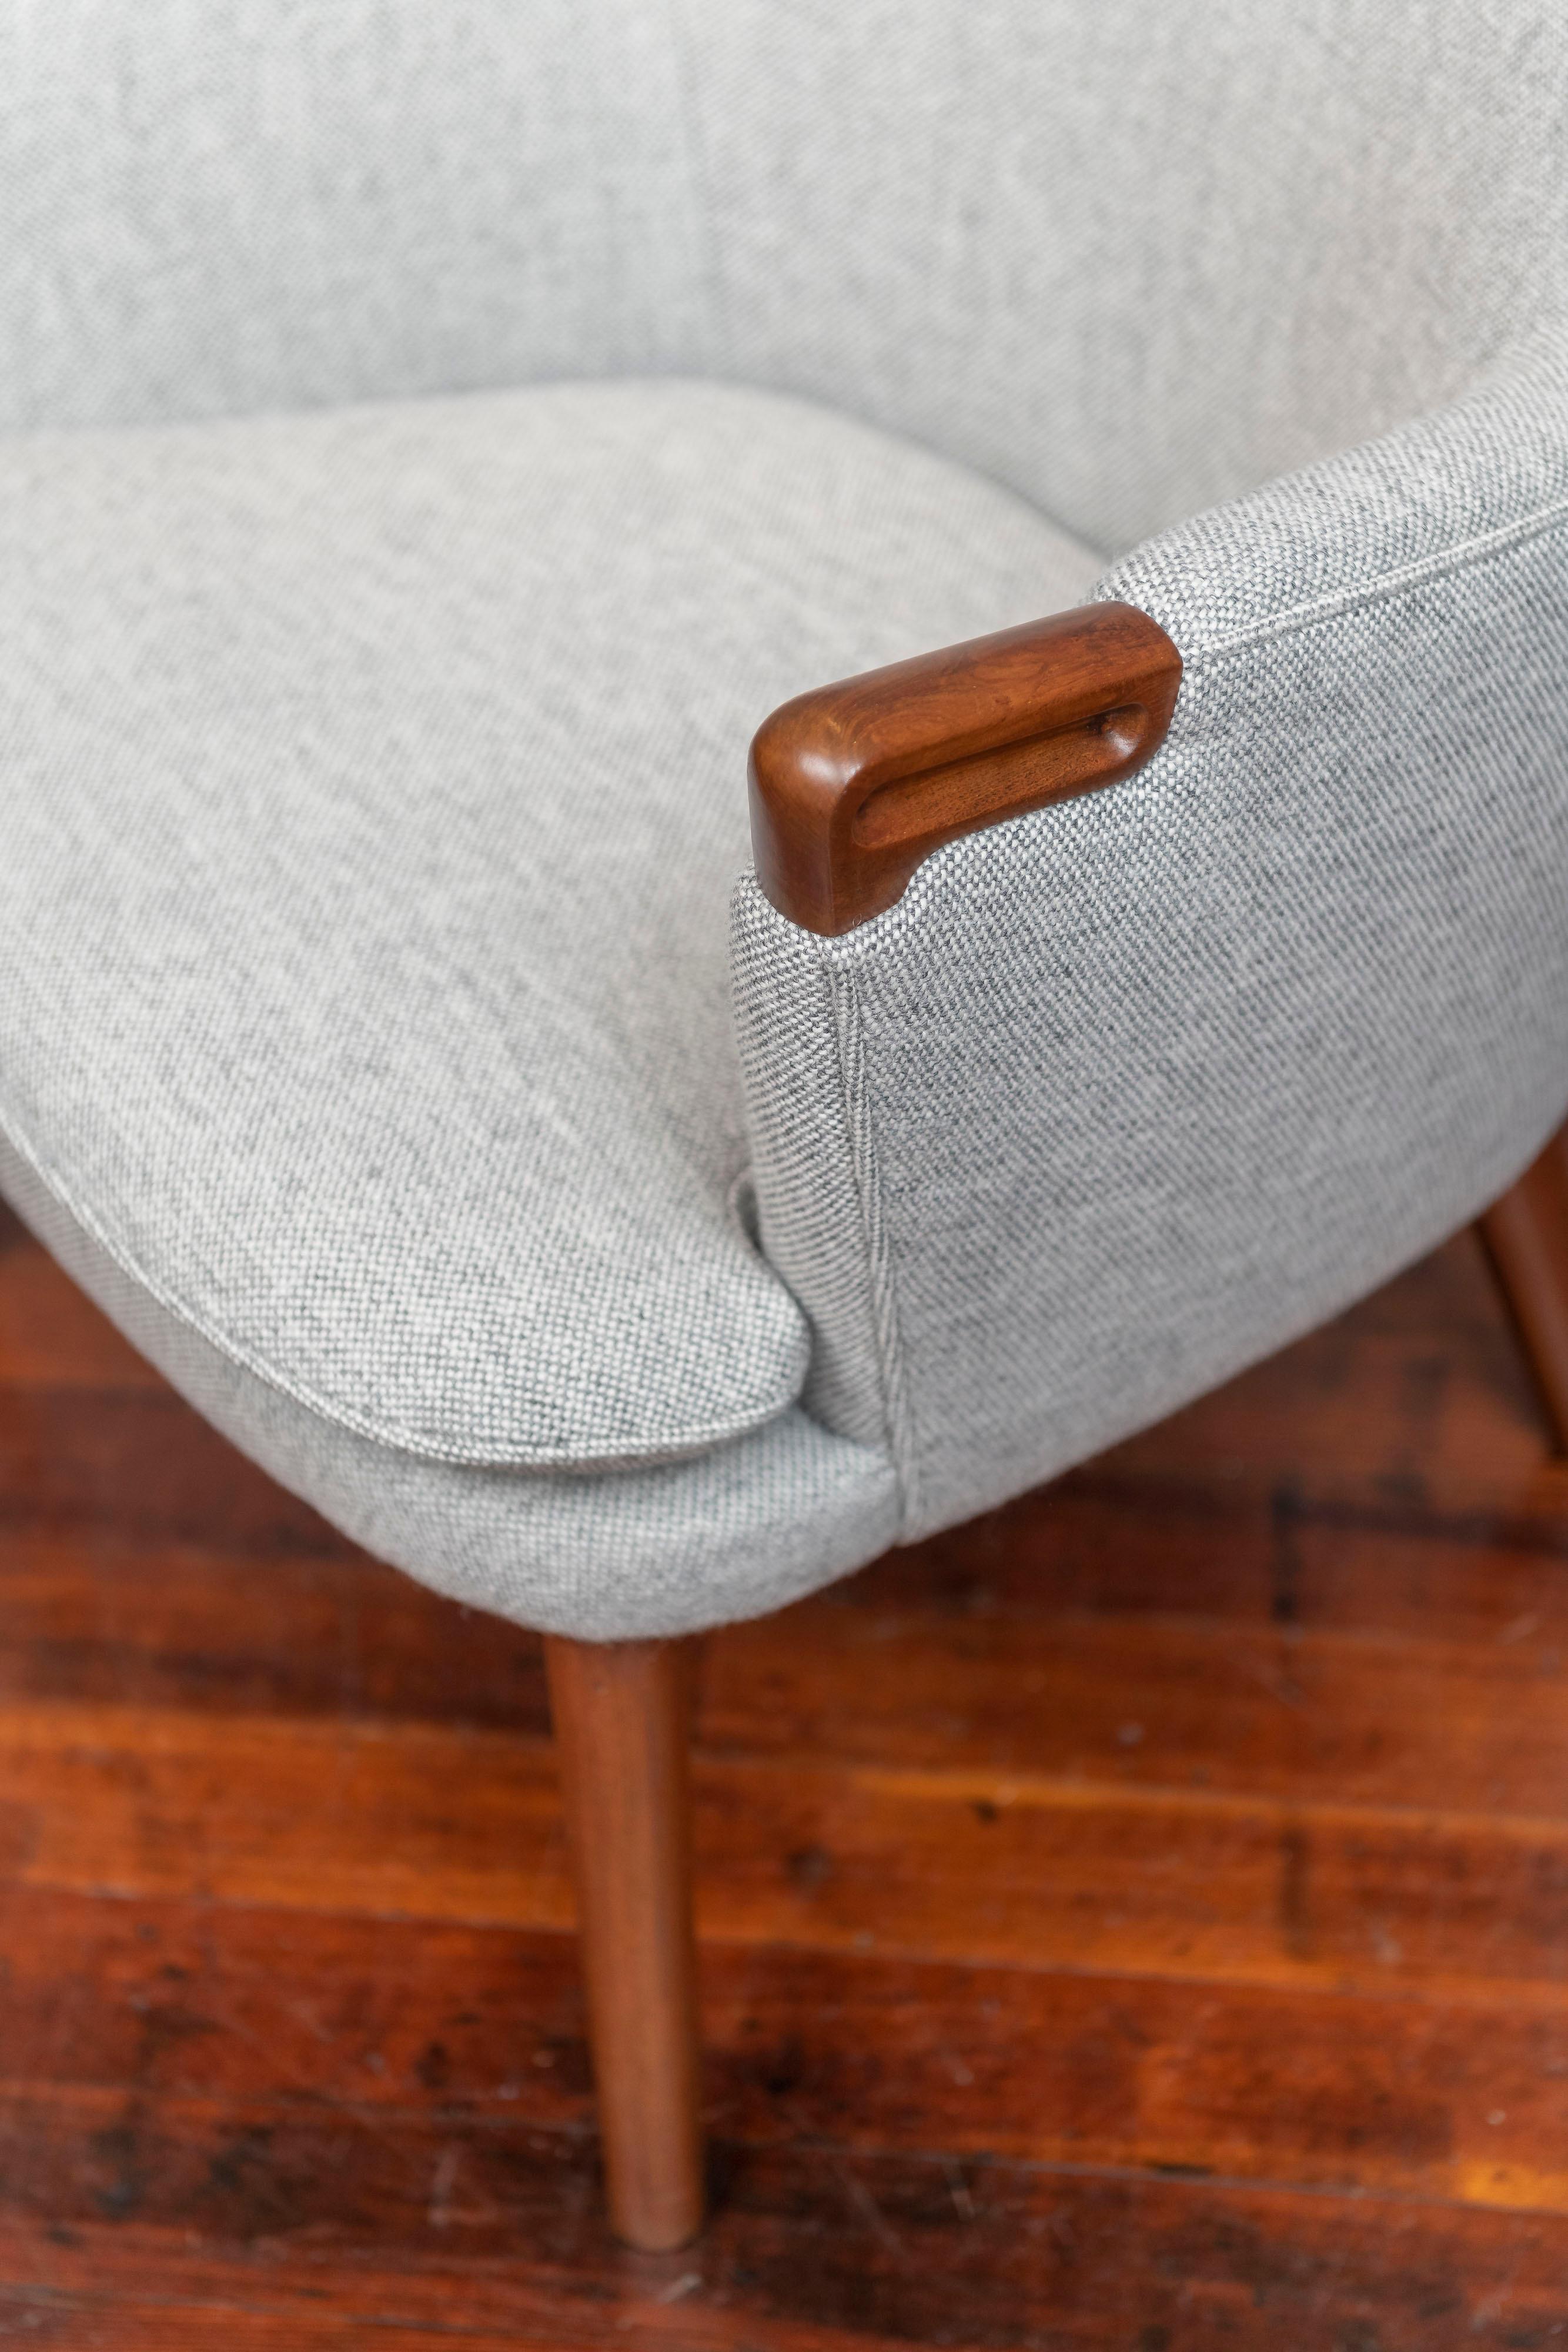 Hans J. Wegner design lounge chair, Model AP-20 for AP Stolen Denmark. Rare model by the master of Danish Modern design furniture. Newly refinished teak arms and legs with new Maharam wool upholstery. Very comfy and satisfying to sit in for